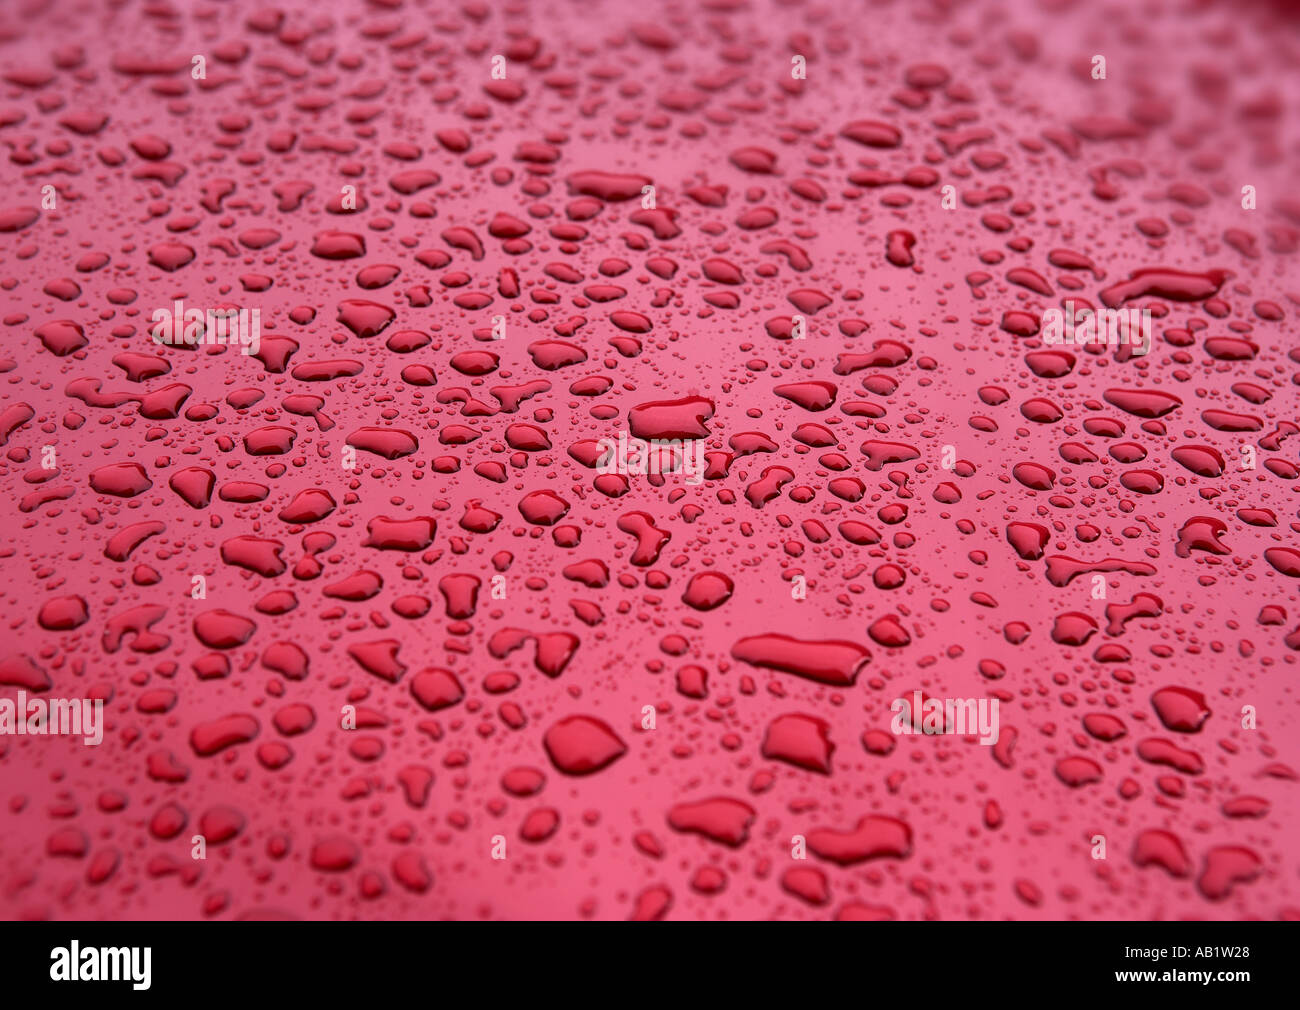 WATER DROPLETS ON RED SURFACE Stock Photo